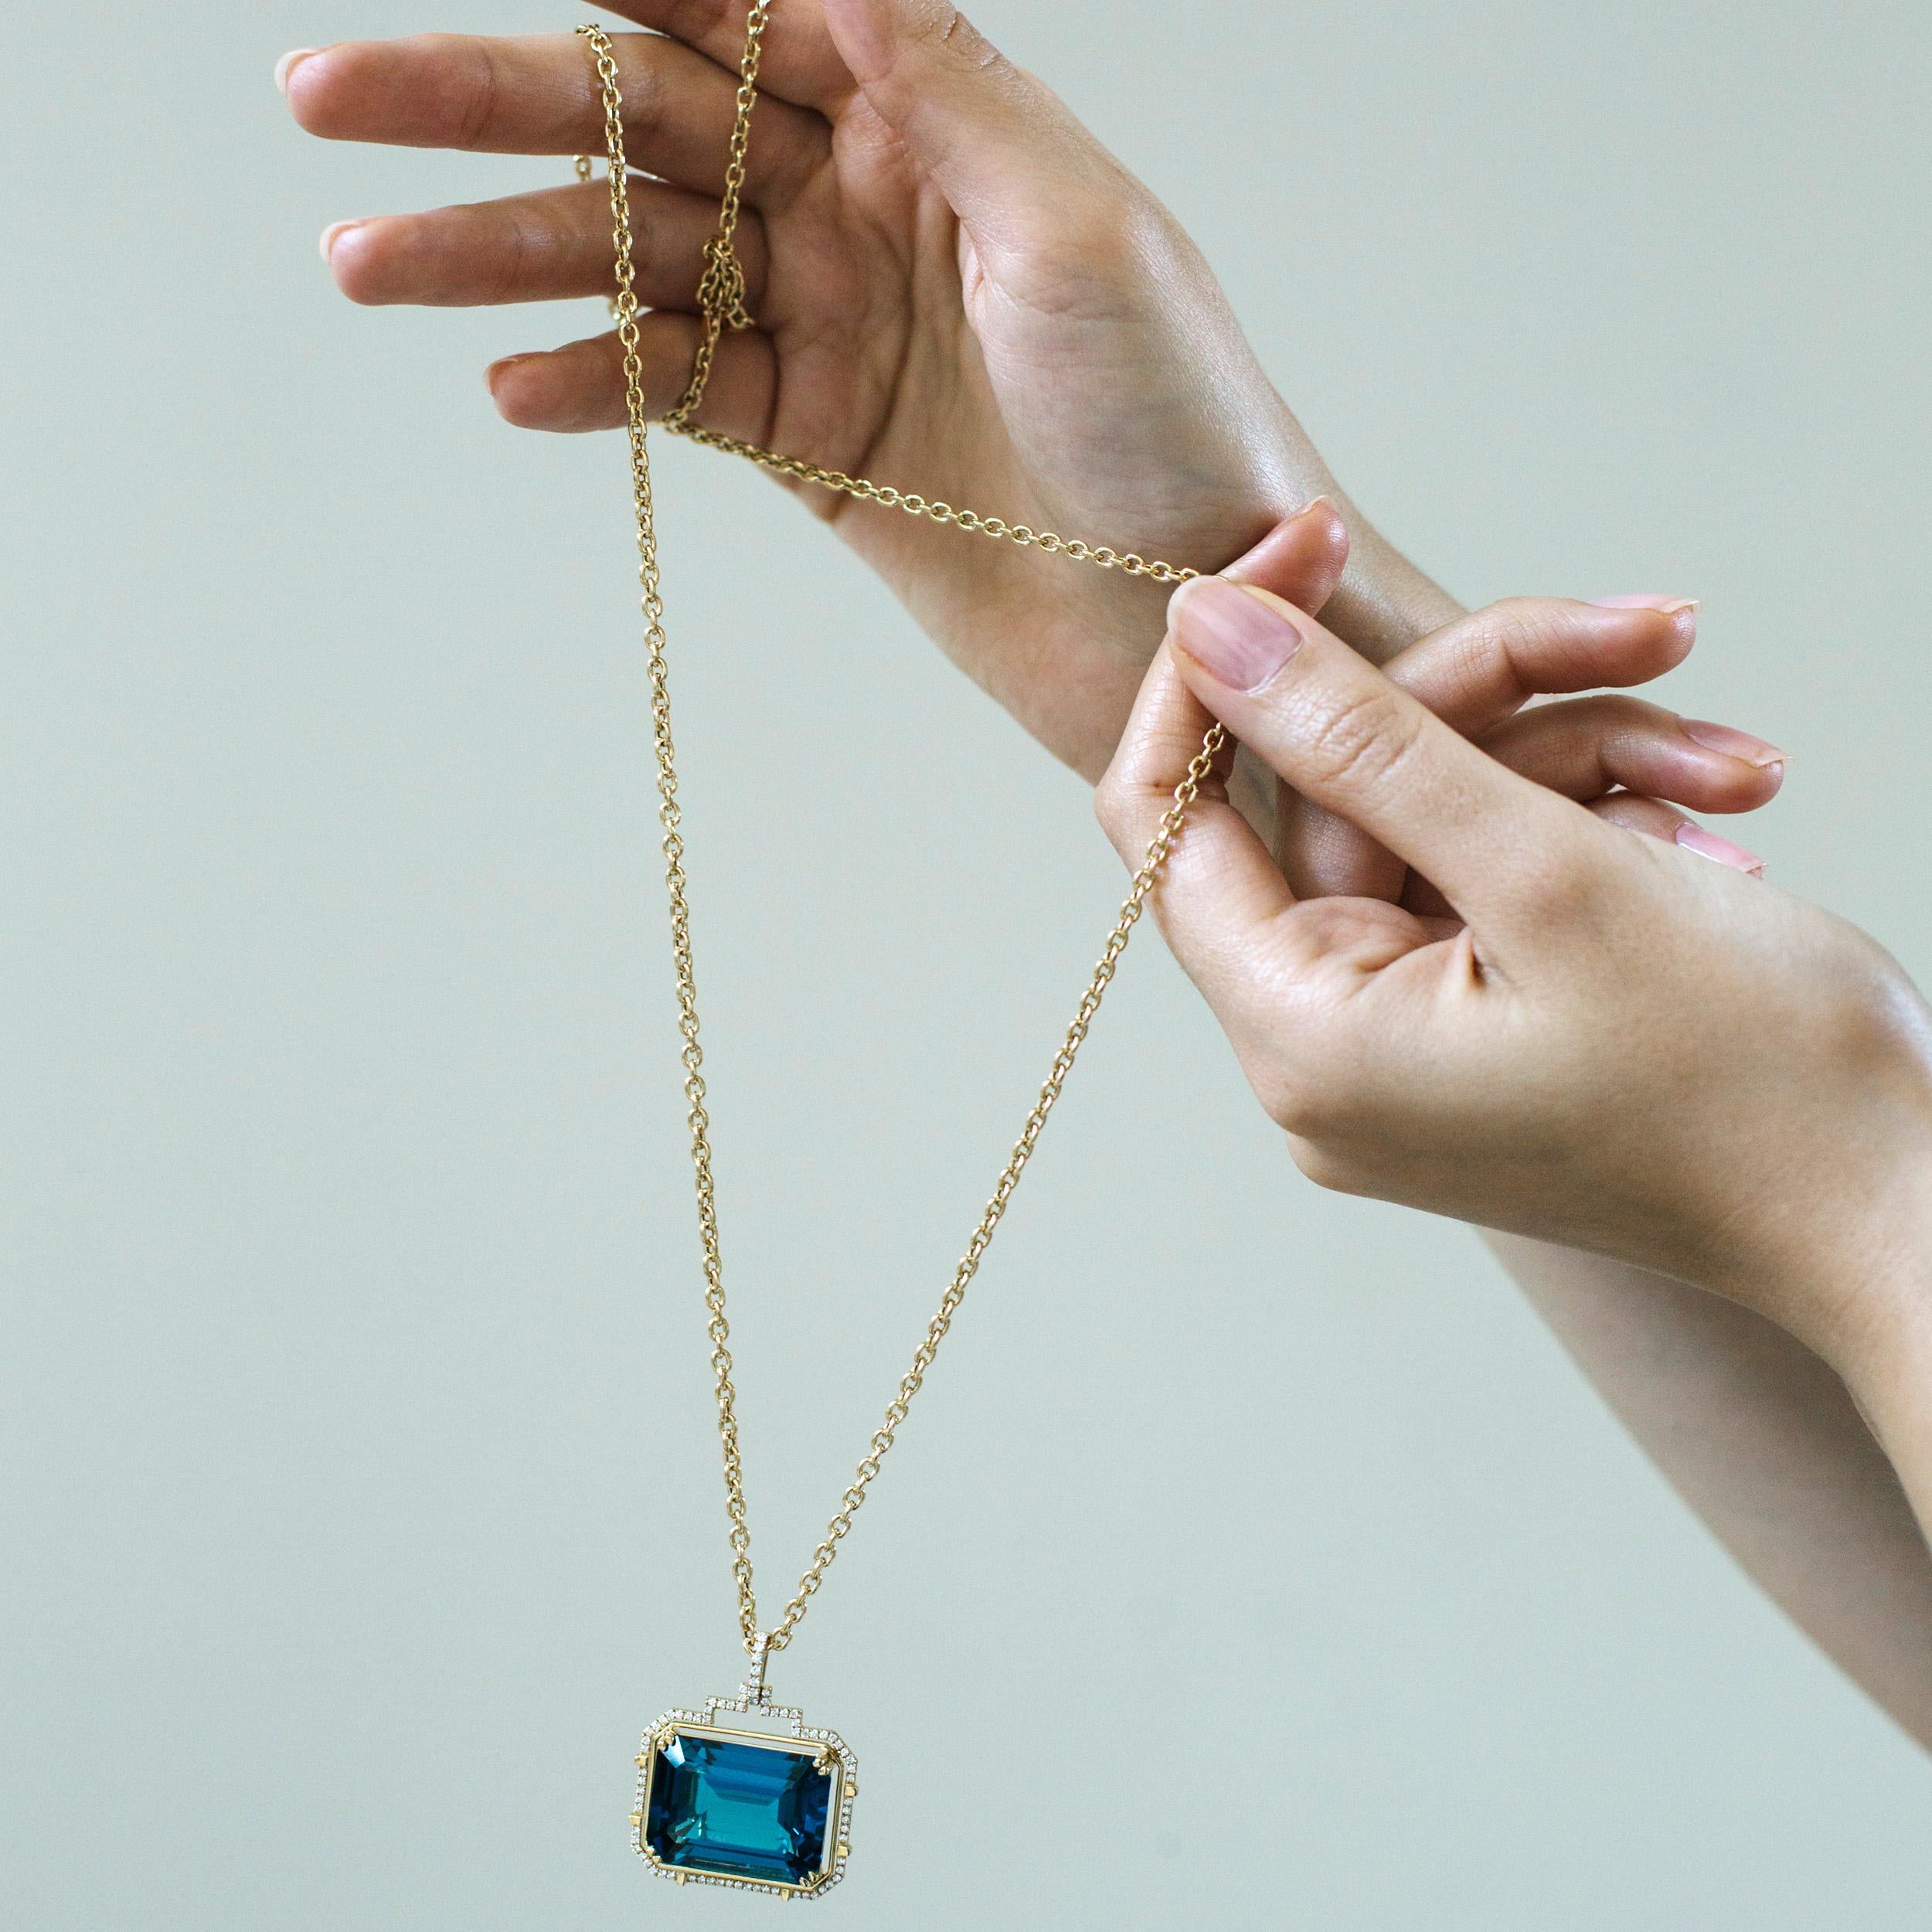 Introducing the epitome of elegance: the London Blue Topaz Emerald Cut Pendant from the exquisite 'Gossip' Collection. Crafted in lustrous 18K yellow gold, this pendant is a mesmerizing blend of sophistication and allure. The centerpiece features a